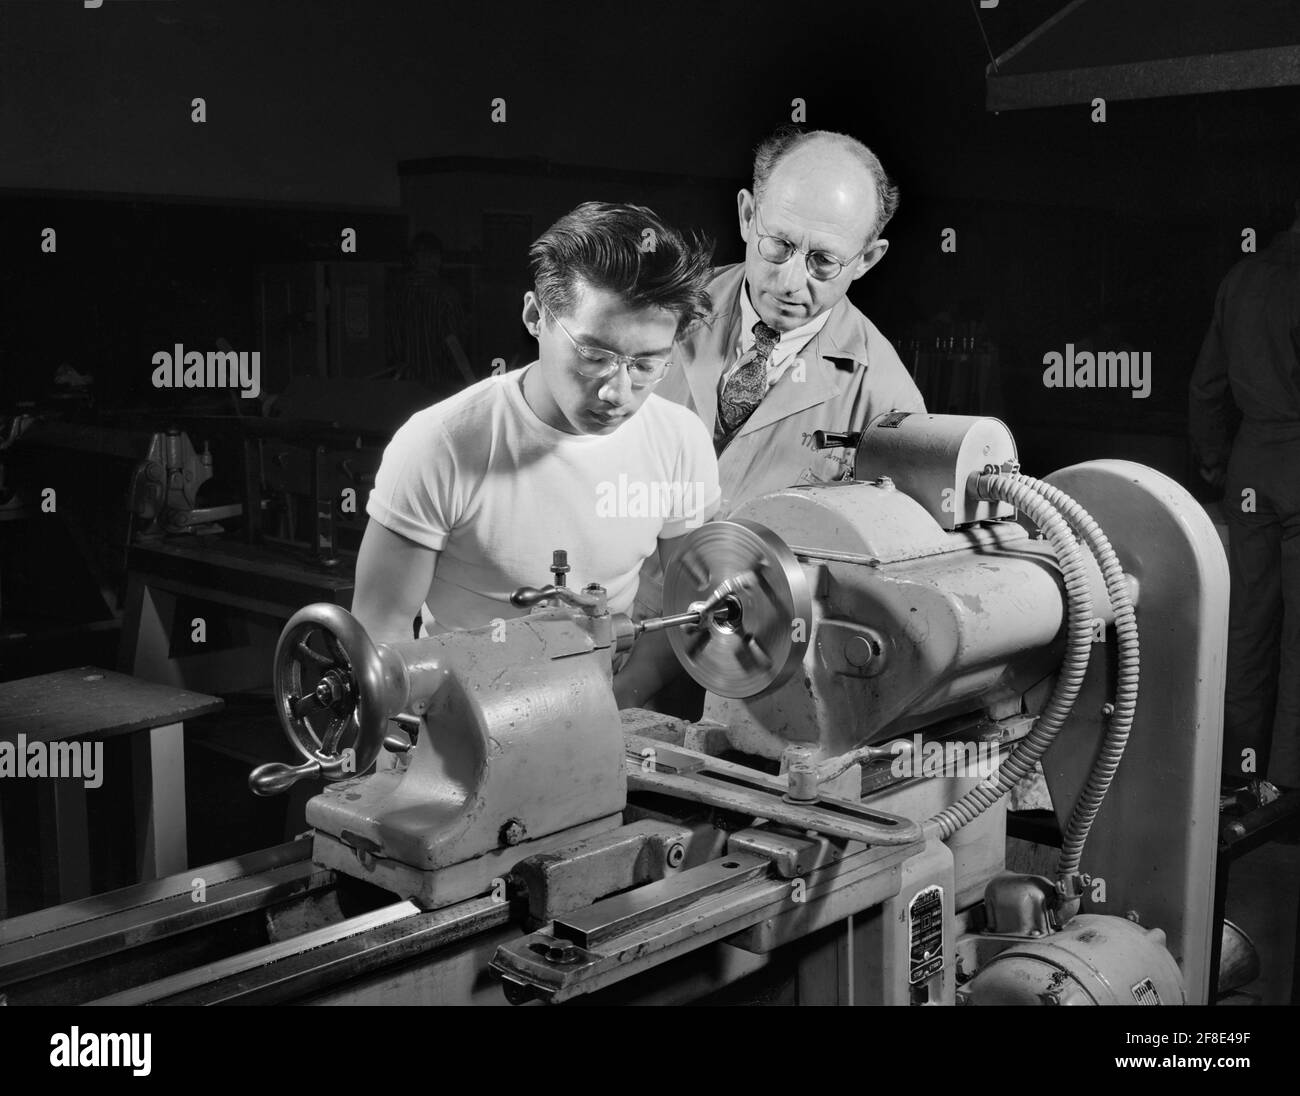 Chinese-American Student learning to operate Lathe to help in War Program, High School Victory Corps, Polytechnic High School, Los Angeles, California, USA, Alfred T. Palmer, U.S. Office of War Information, September 1942 Stock Photo